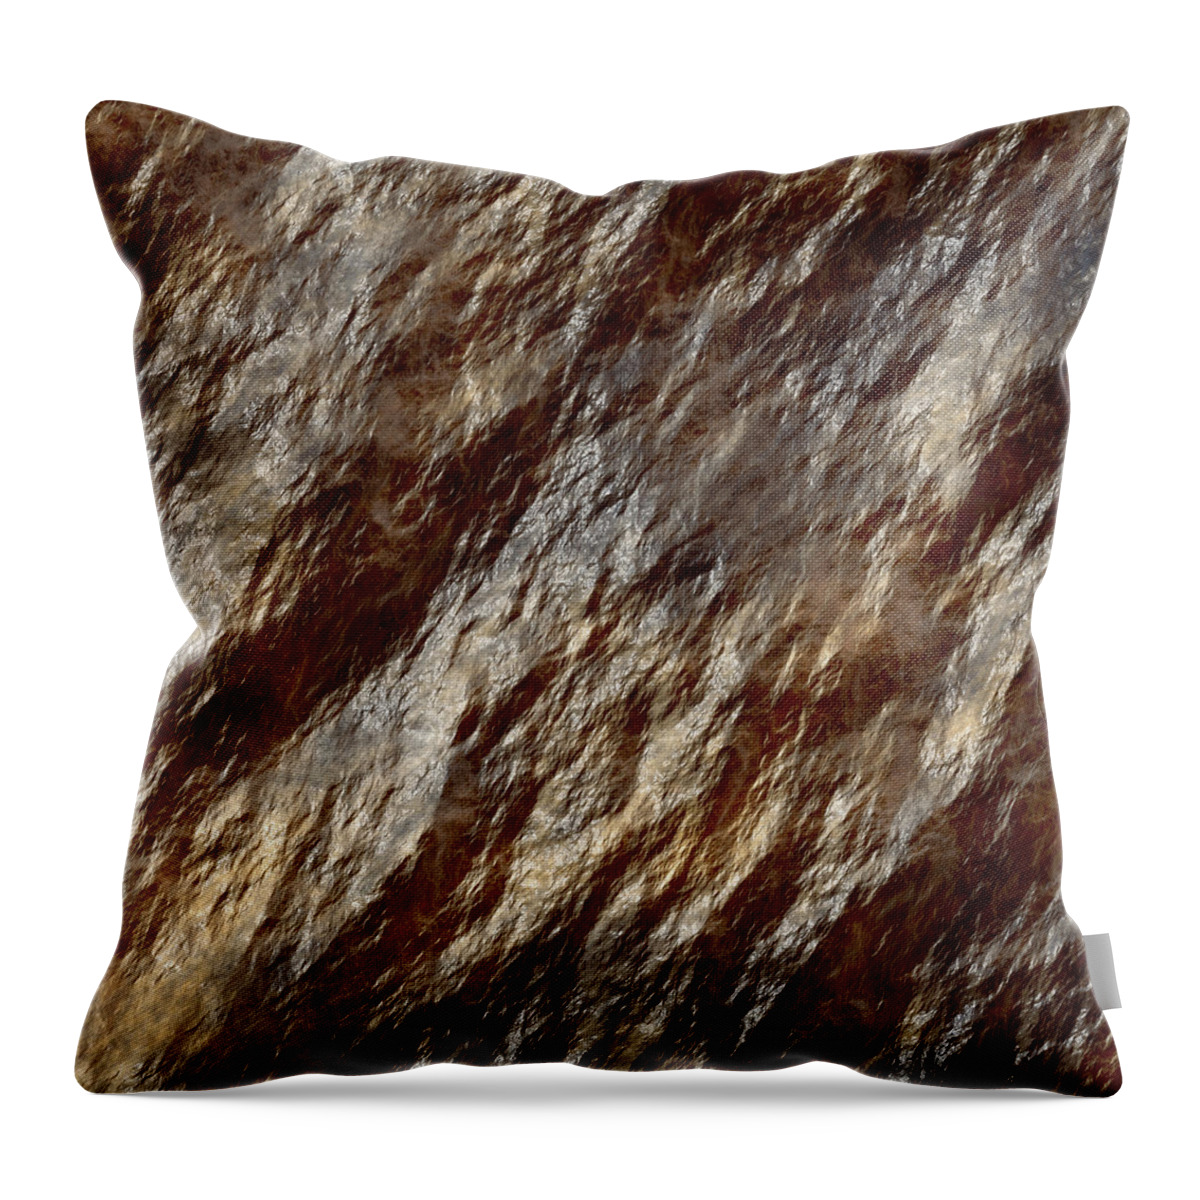 Mineral Throw Pillow featuring the photograph Wet Rock by Zocha k